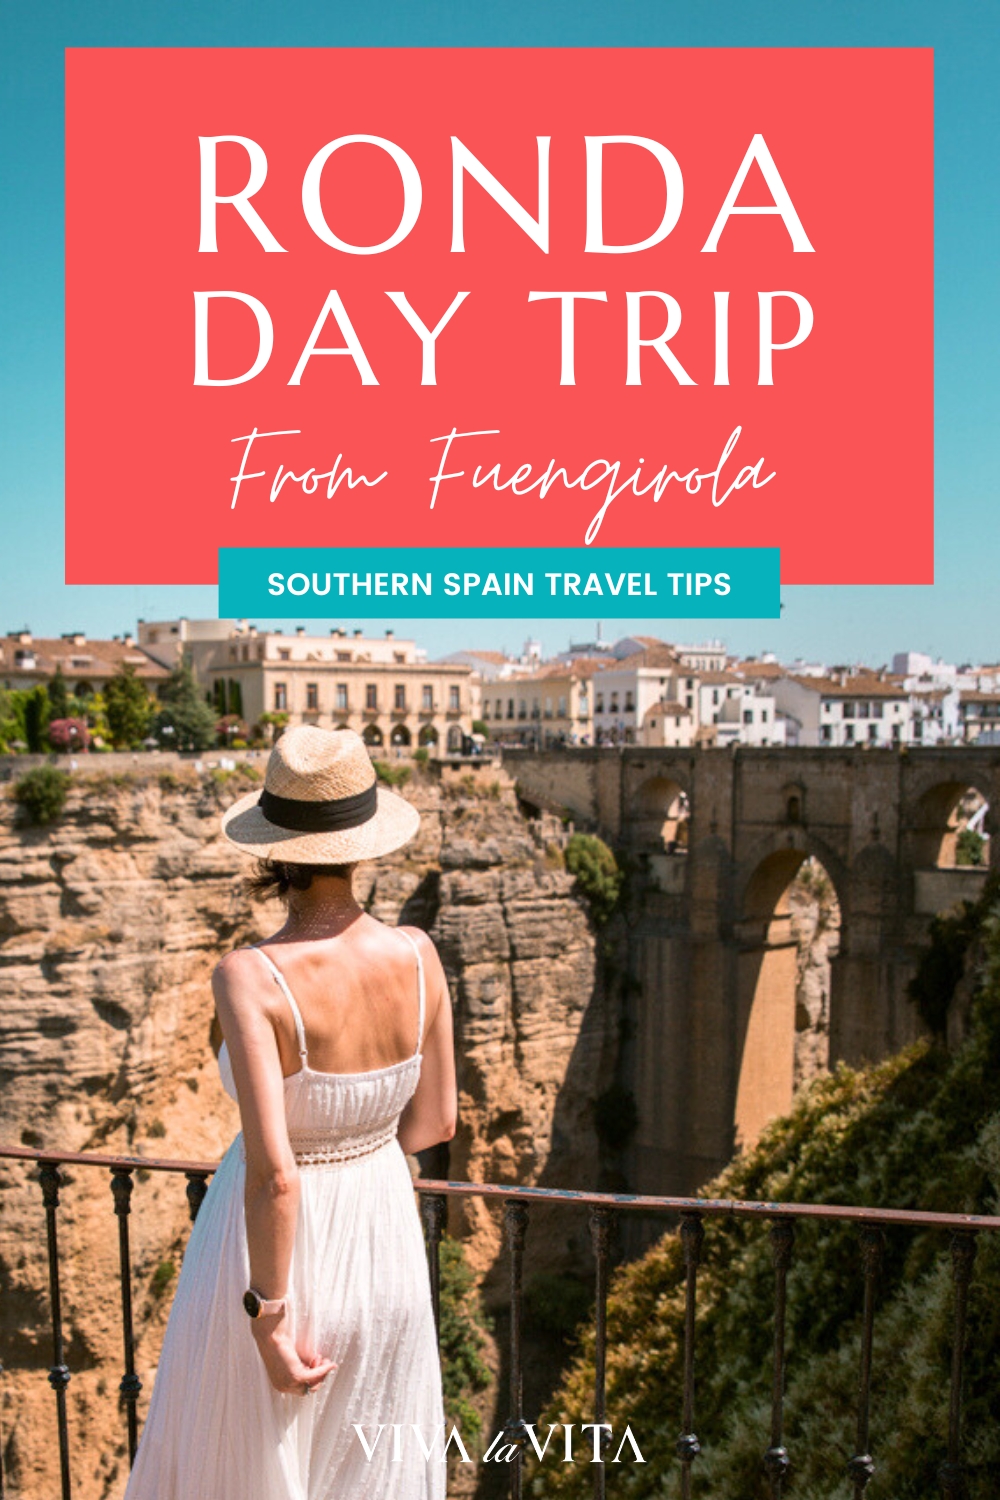 pinterest image showing the new bridge of Ronda in southern spain, with a headline - ronda day trip from Fuengirola, southern spain travel tips